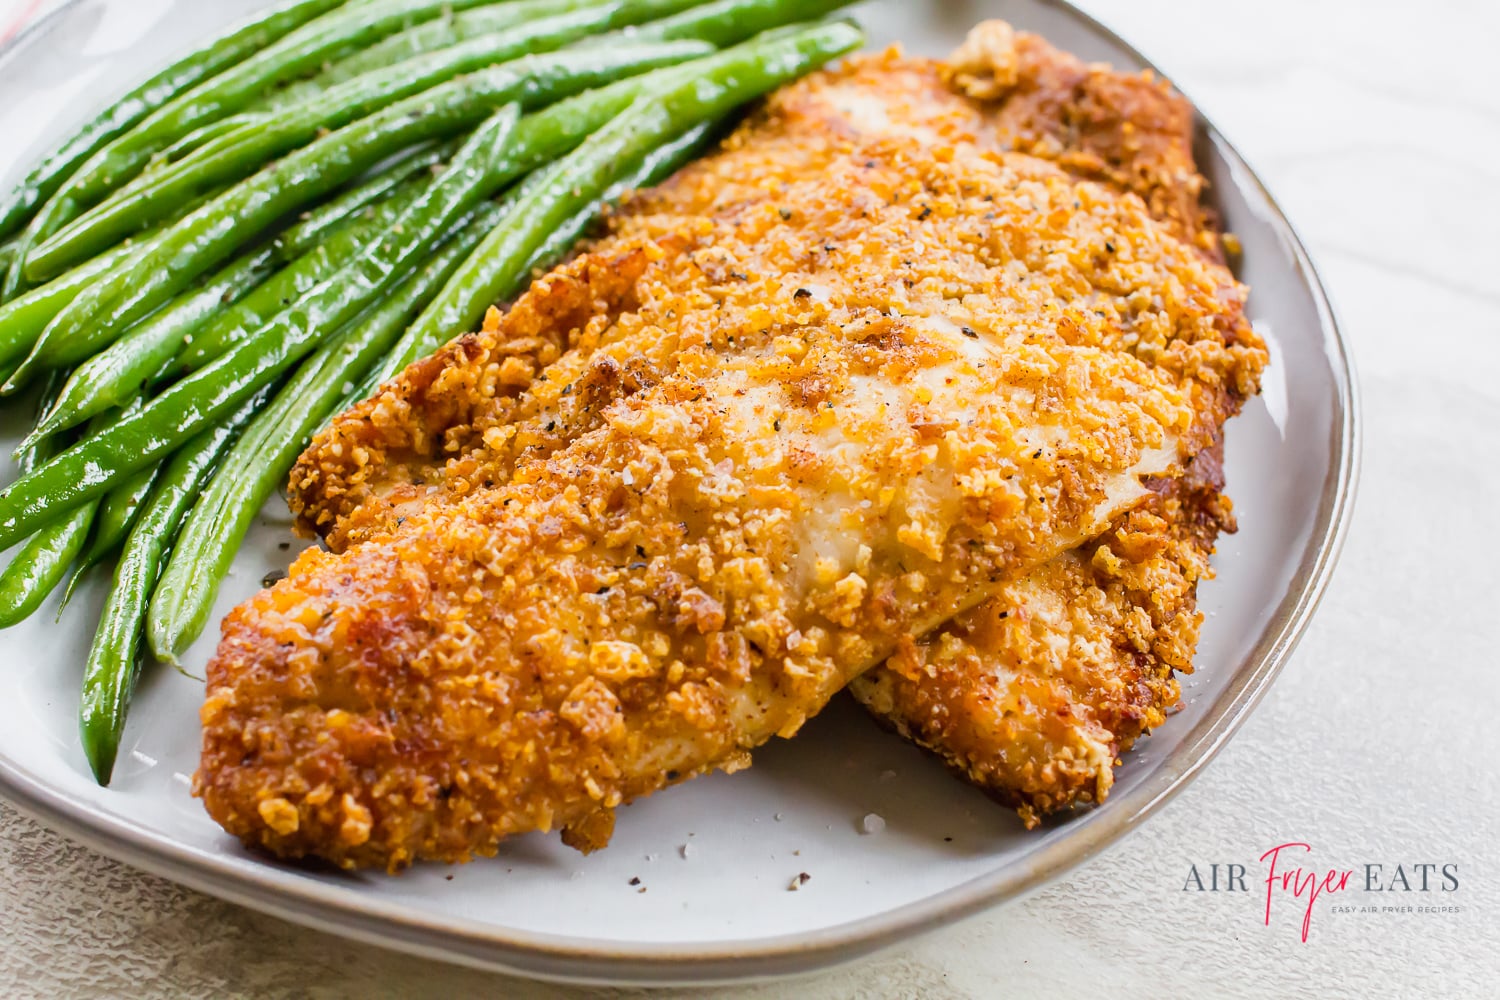 Tilapia with a breadcrumb crust on a gray round plate with green beans